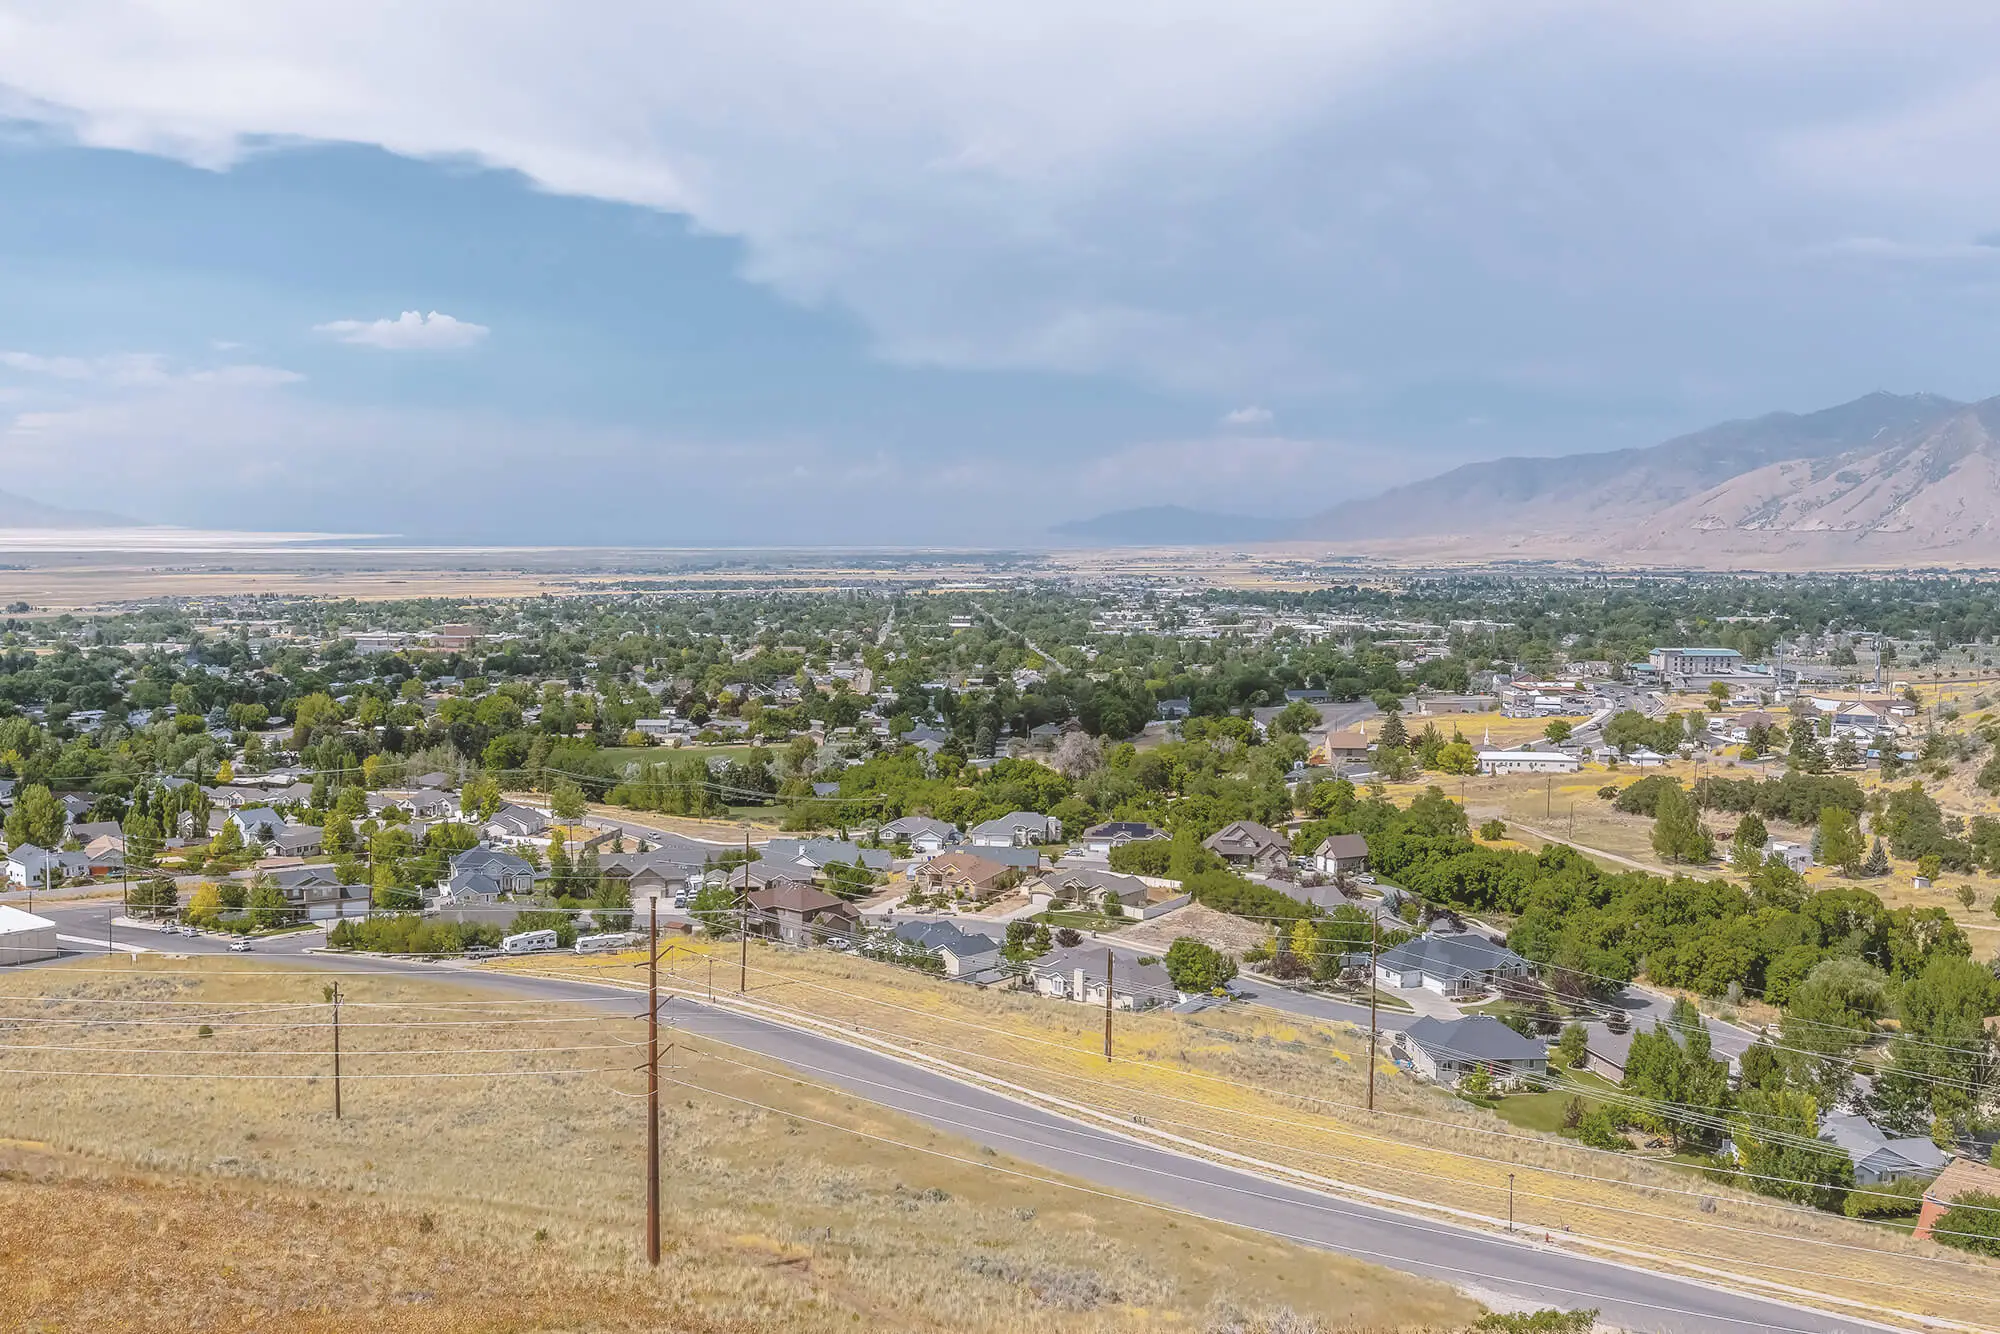 Tooele Utah in the summer. Properties serviced by Rubicon landscaping.